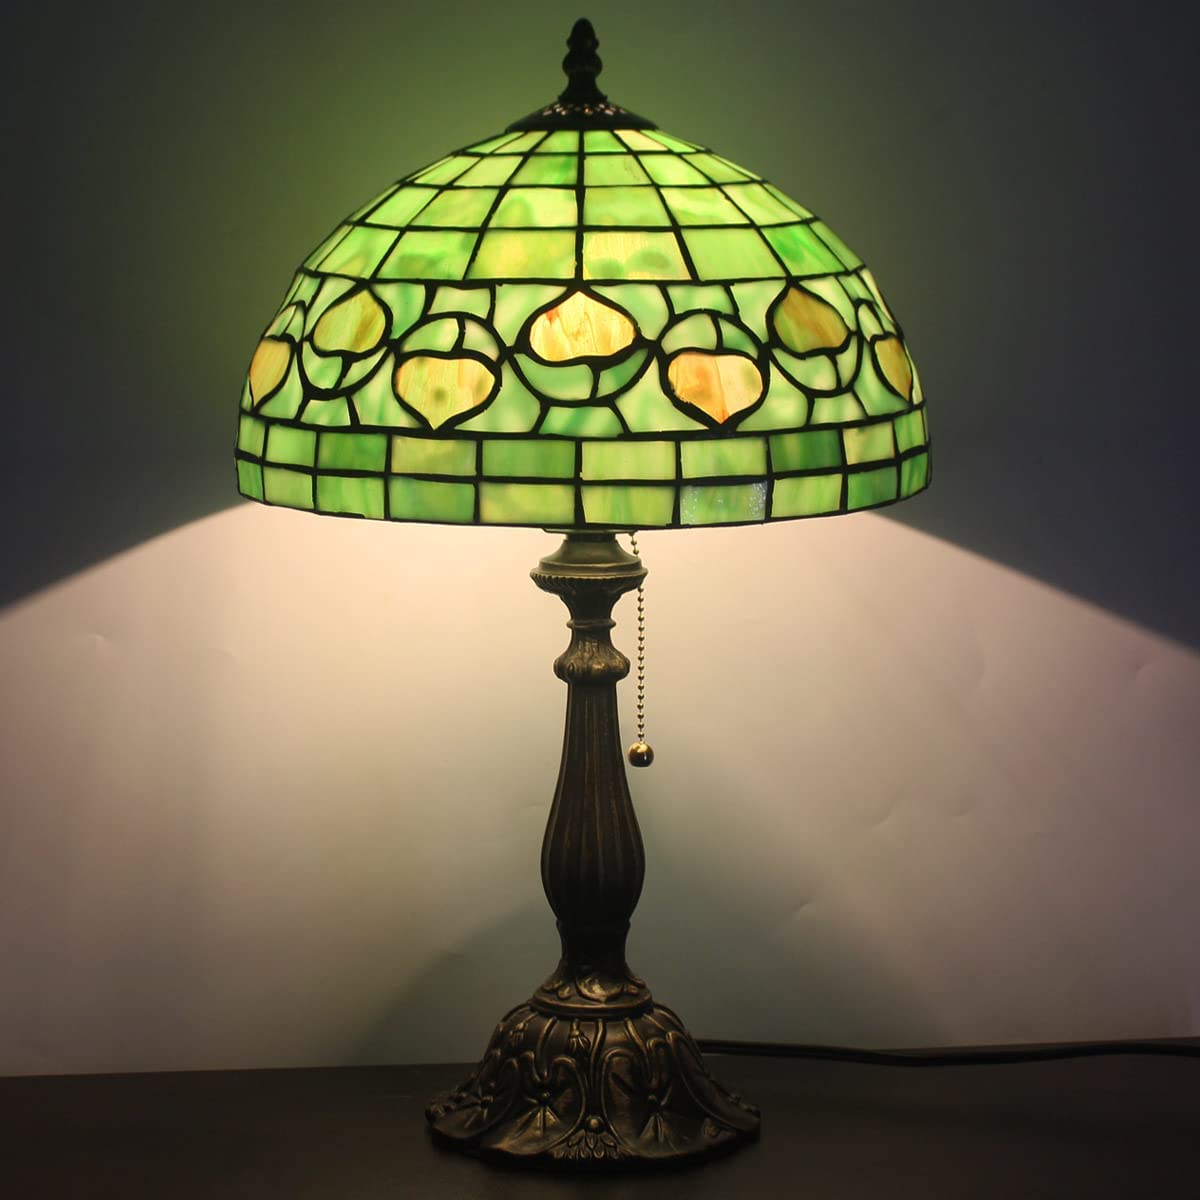 SHADY  Style Table Lamp W12H19 inch Green Stained Glass Antique Bedside Nightstand Desk Reading Lamp Work Study Desktop Light Decor Home Kids Bedroom Living Room Office Pull Chain